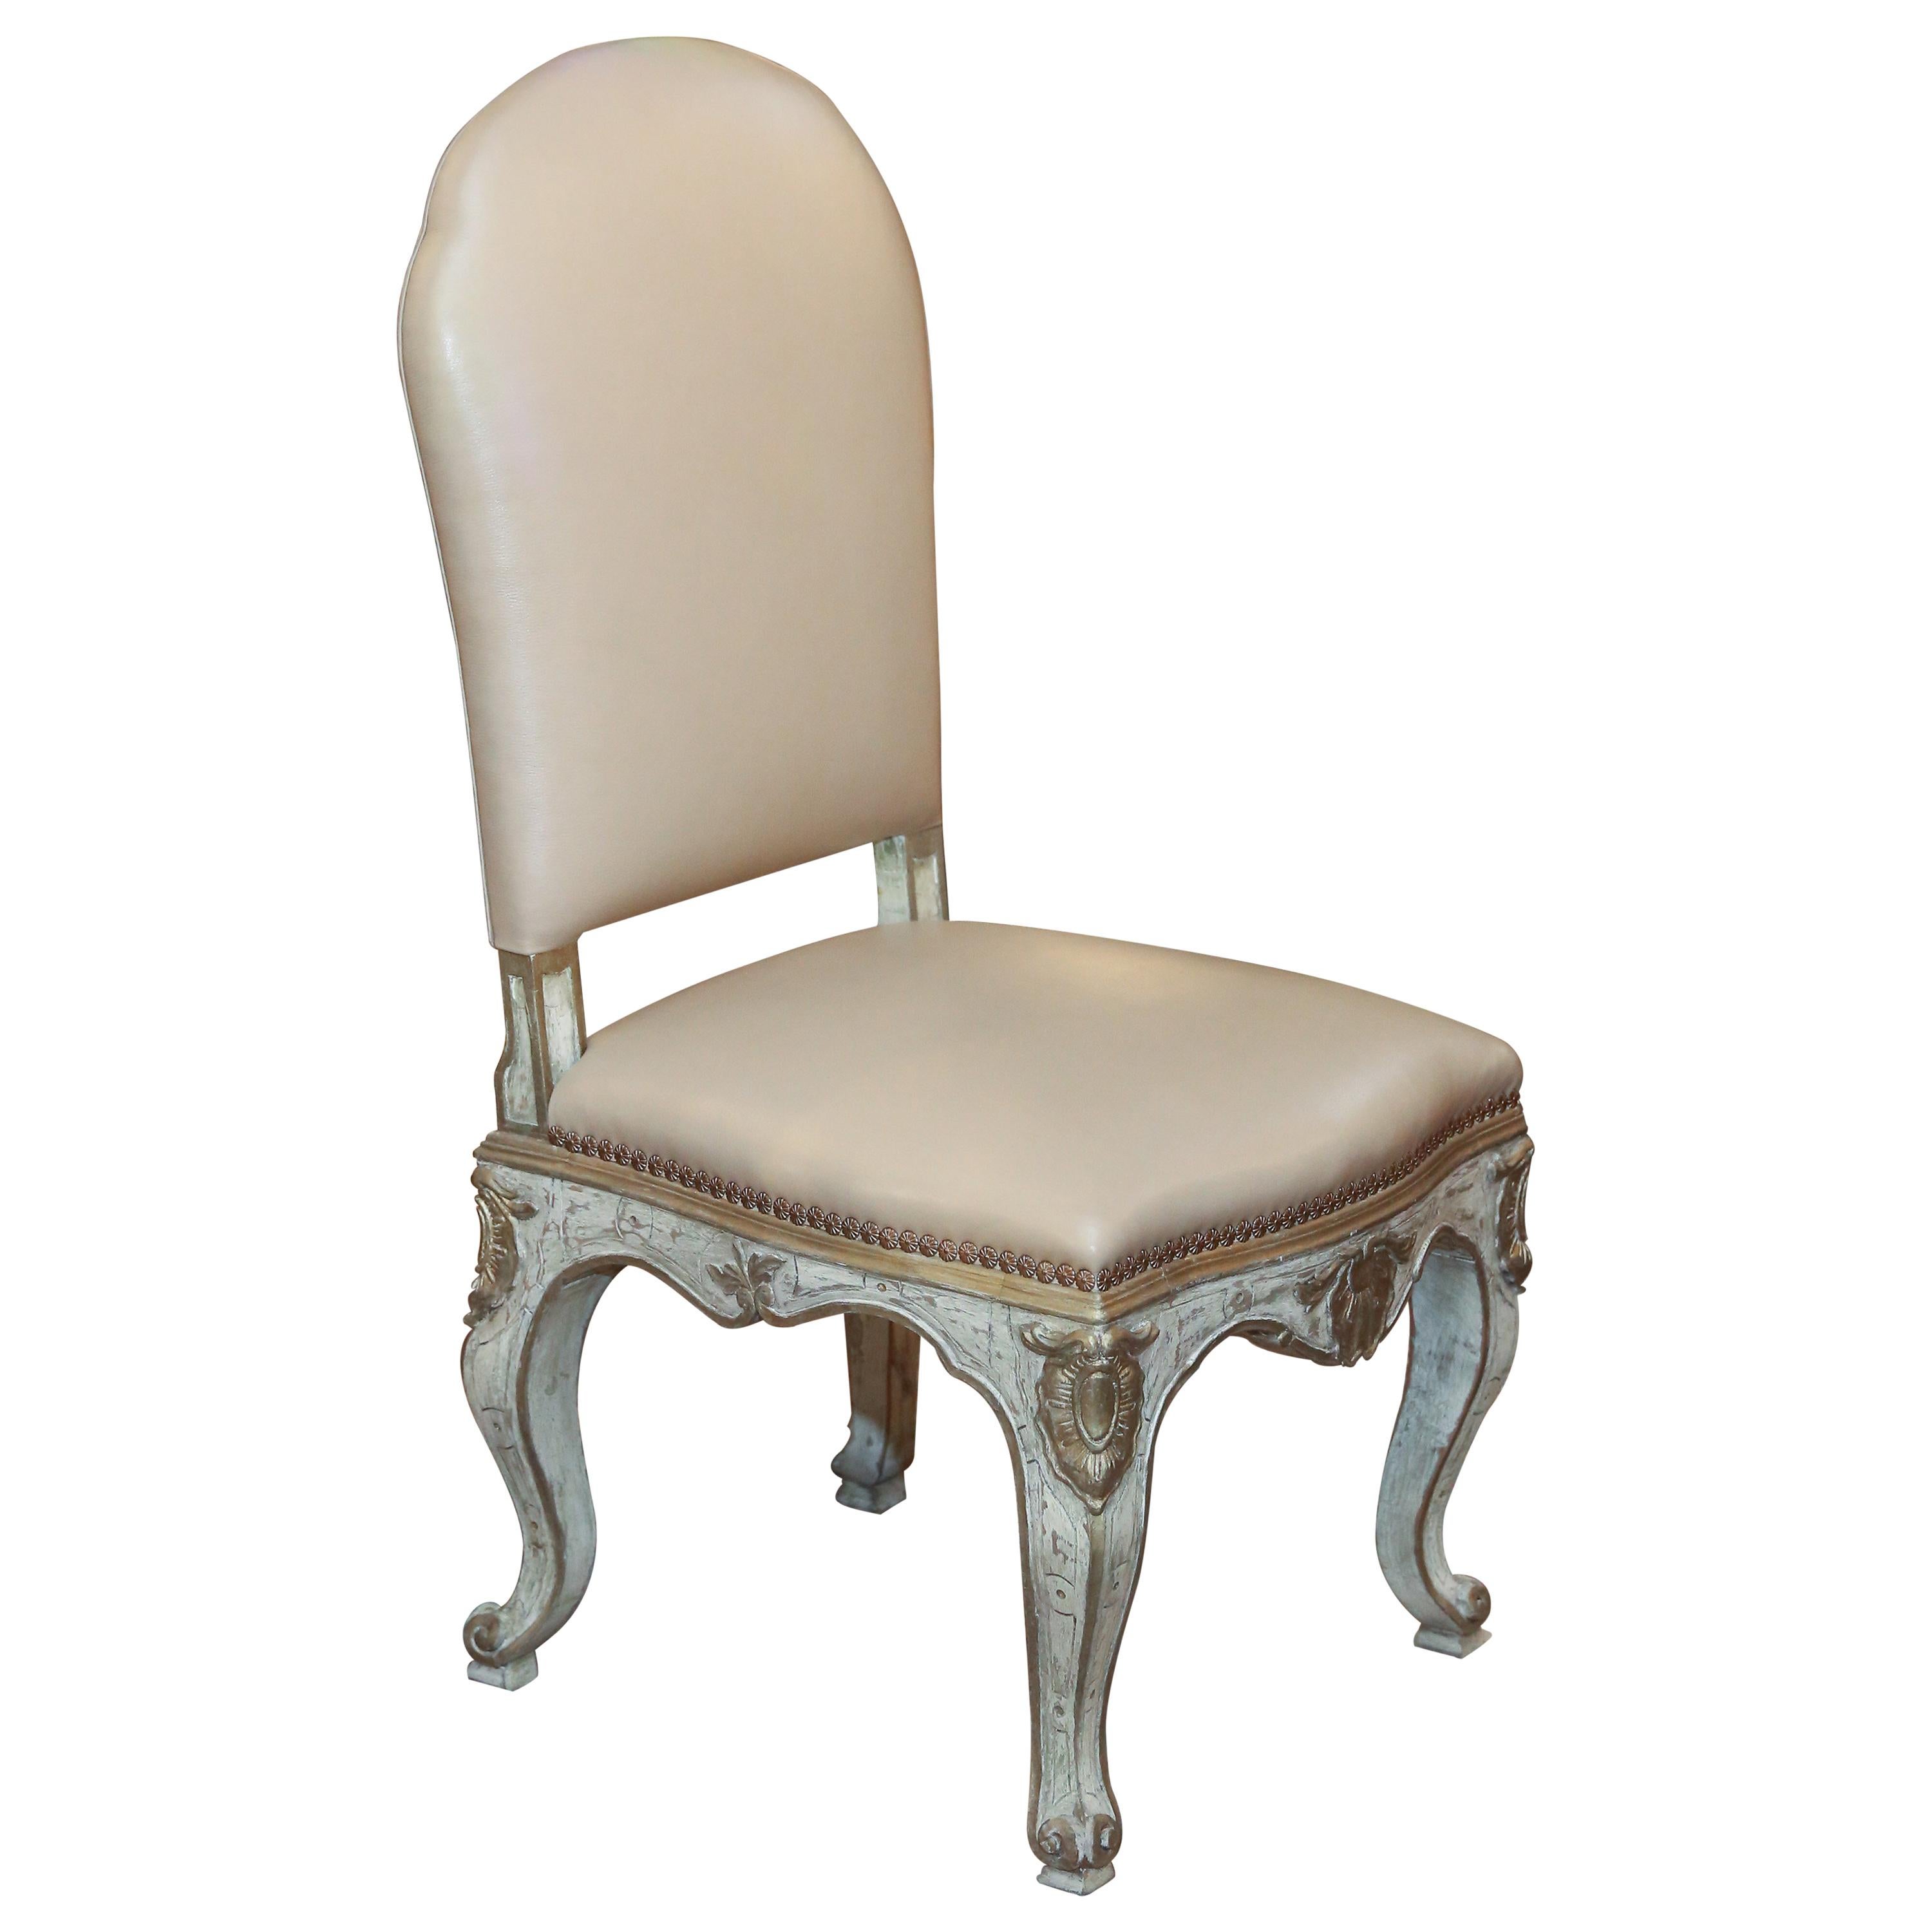 Set of 10 Italian Painted Dining Side Chairs in Cream Leather Upholstery